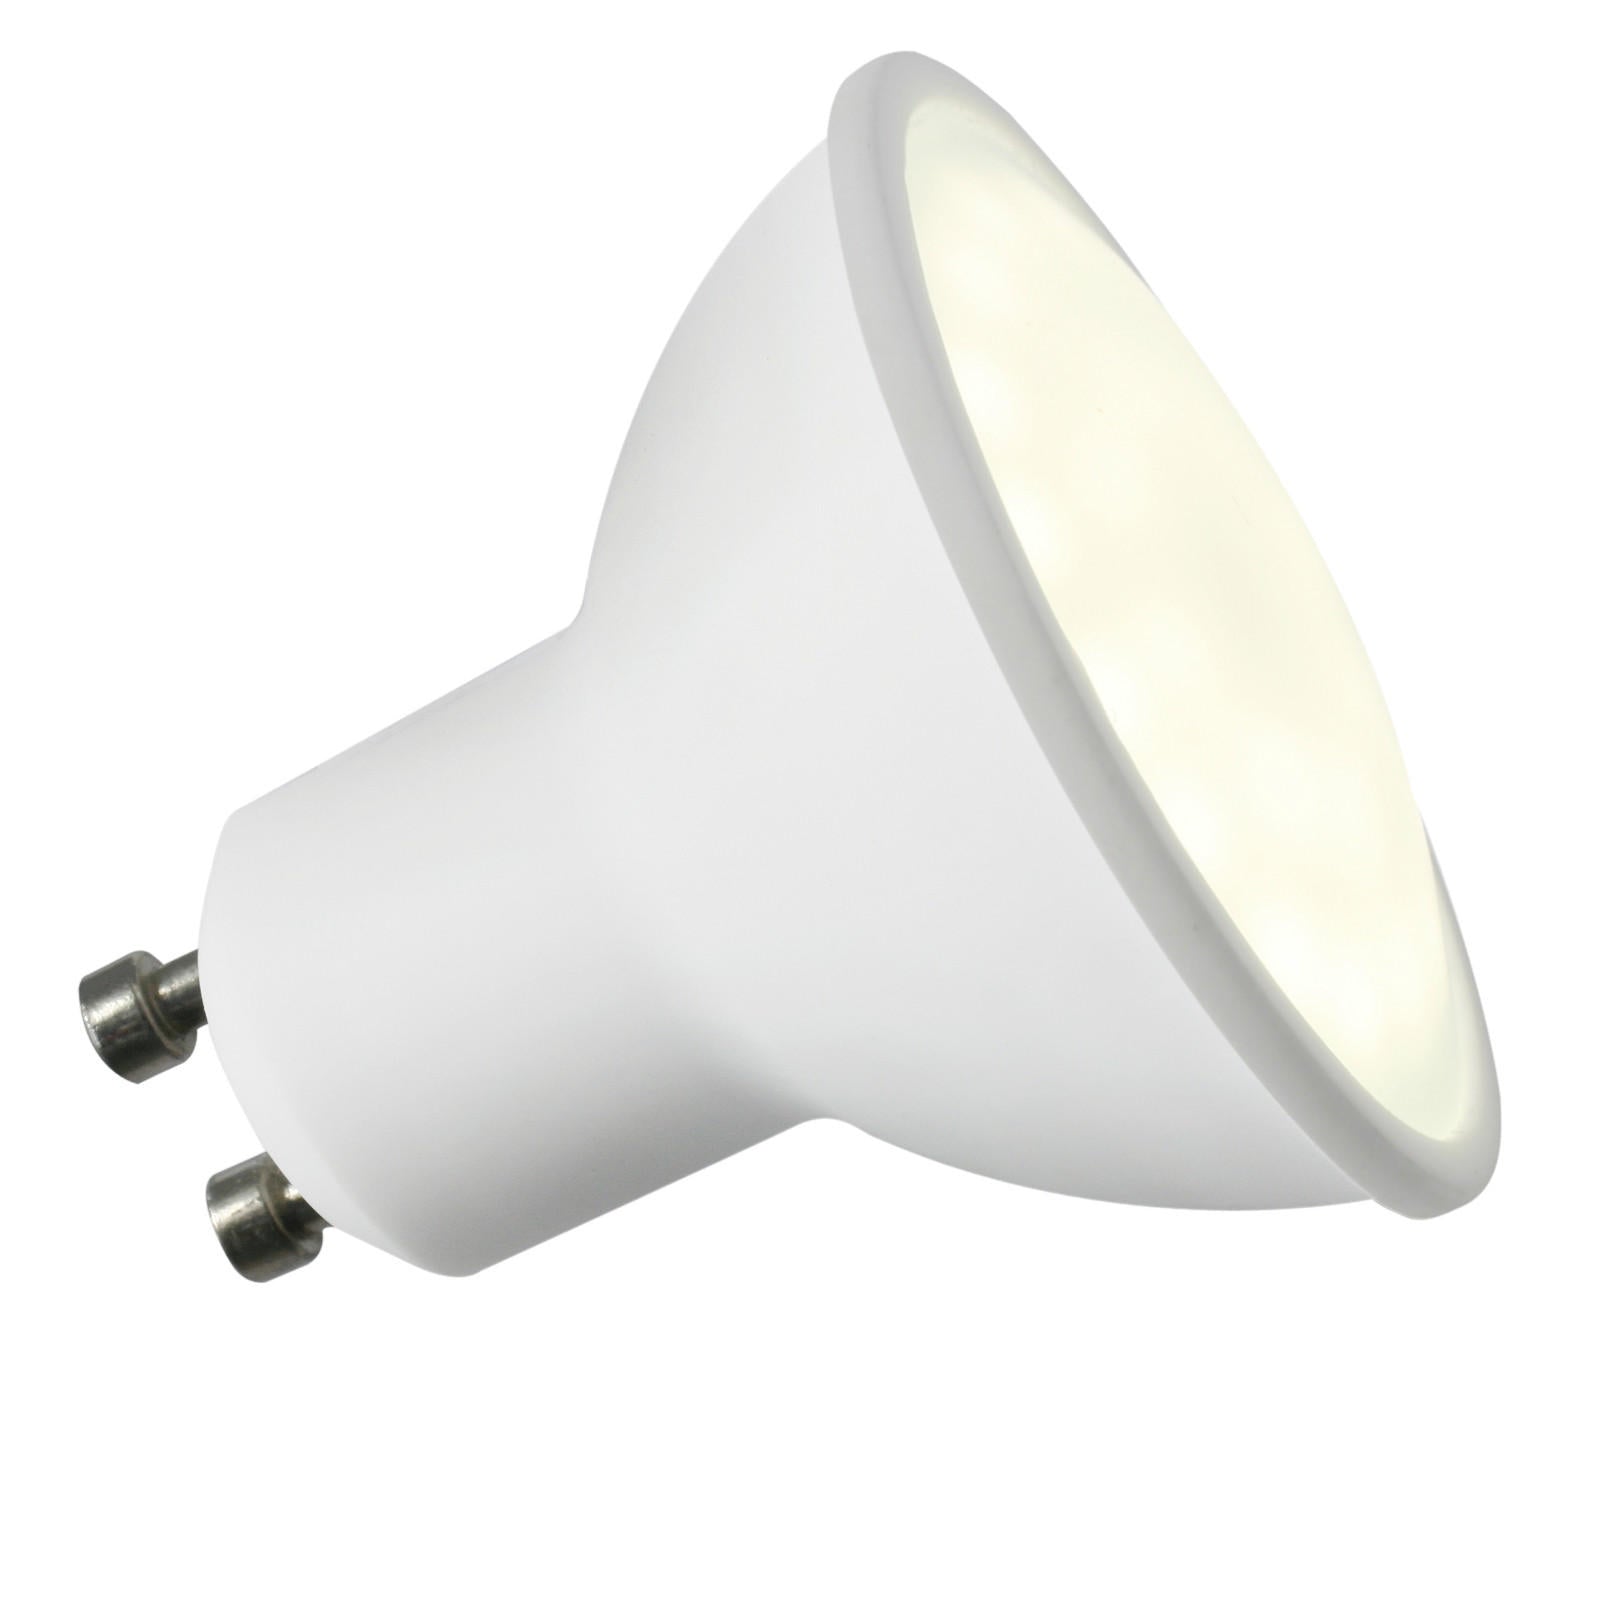 ML Accessories-GUSM5CW 230V GU10 LED 5W 4000K Cool White (non-dimmable)